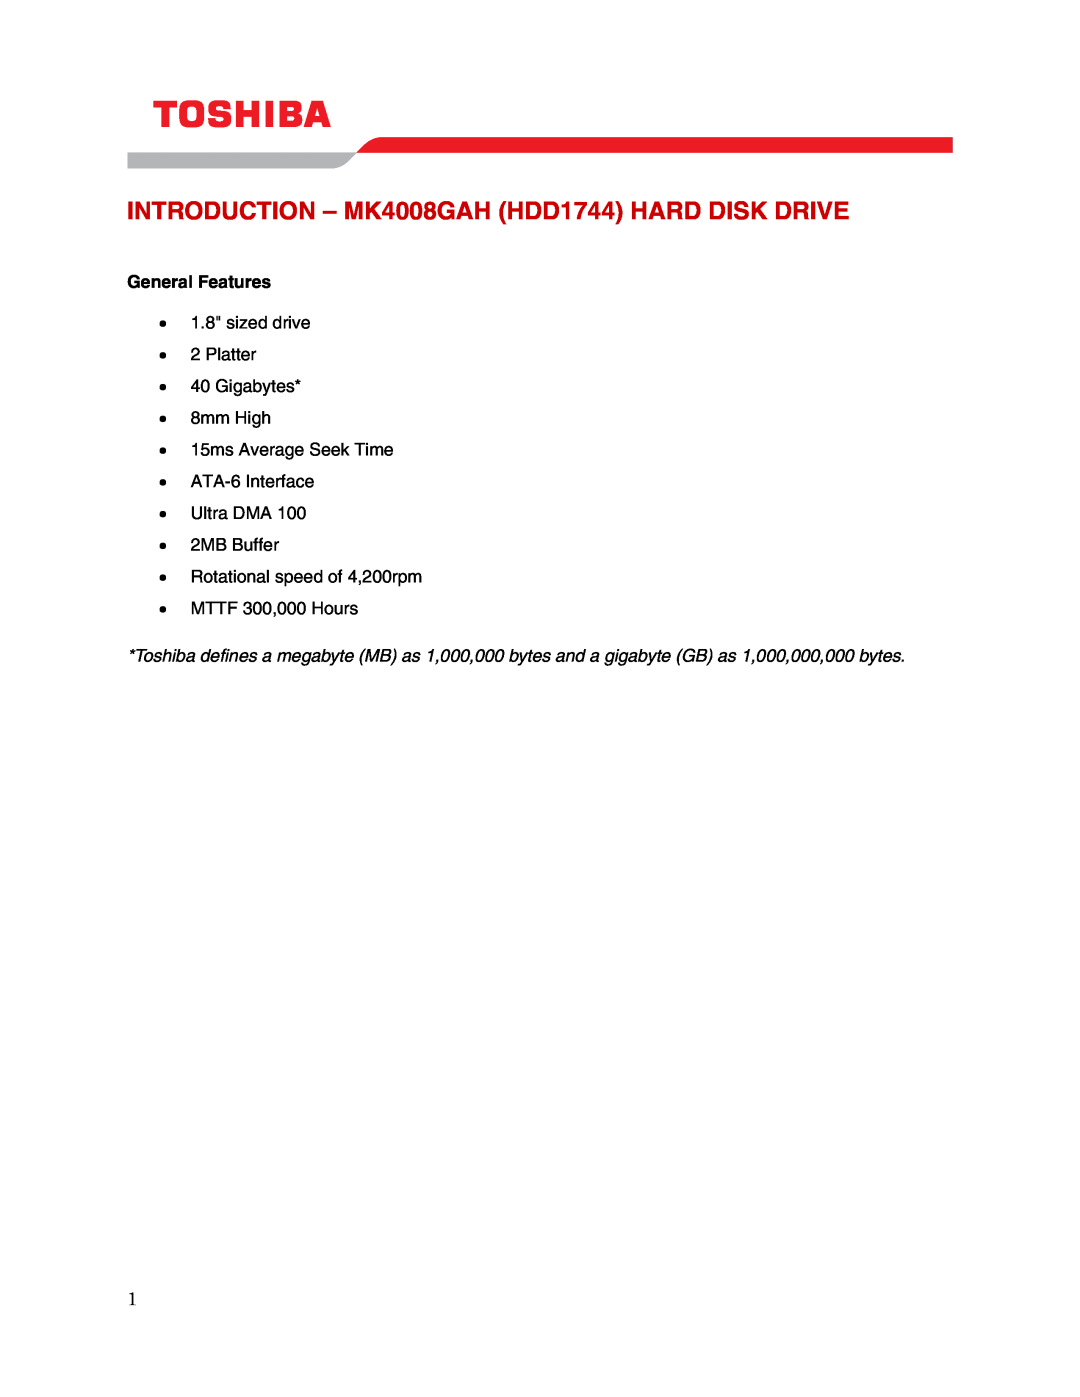 Toshiba user manual INTRODUCTION - MK4008GAH HDD1744 HARD DISK DRIVE, General Features 